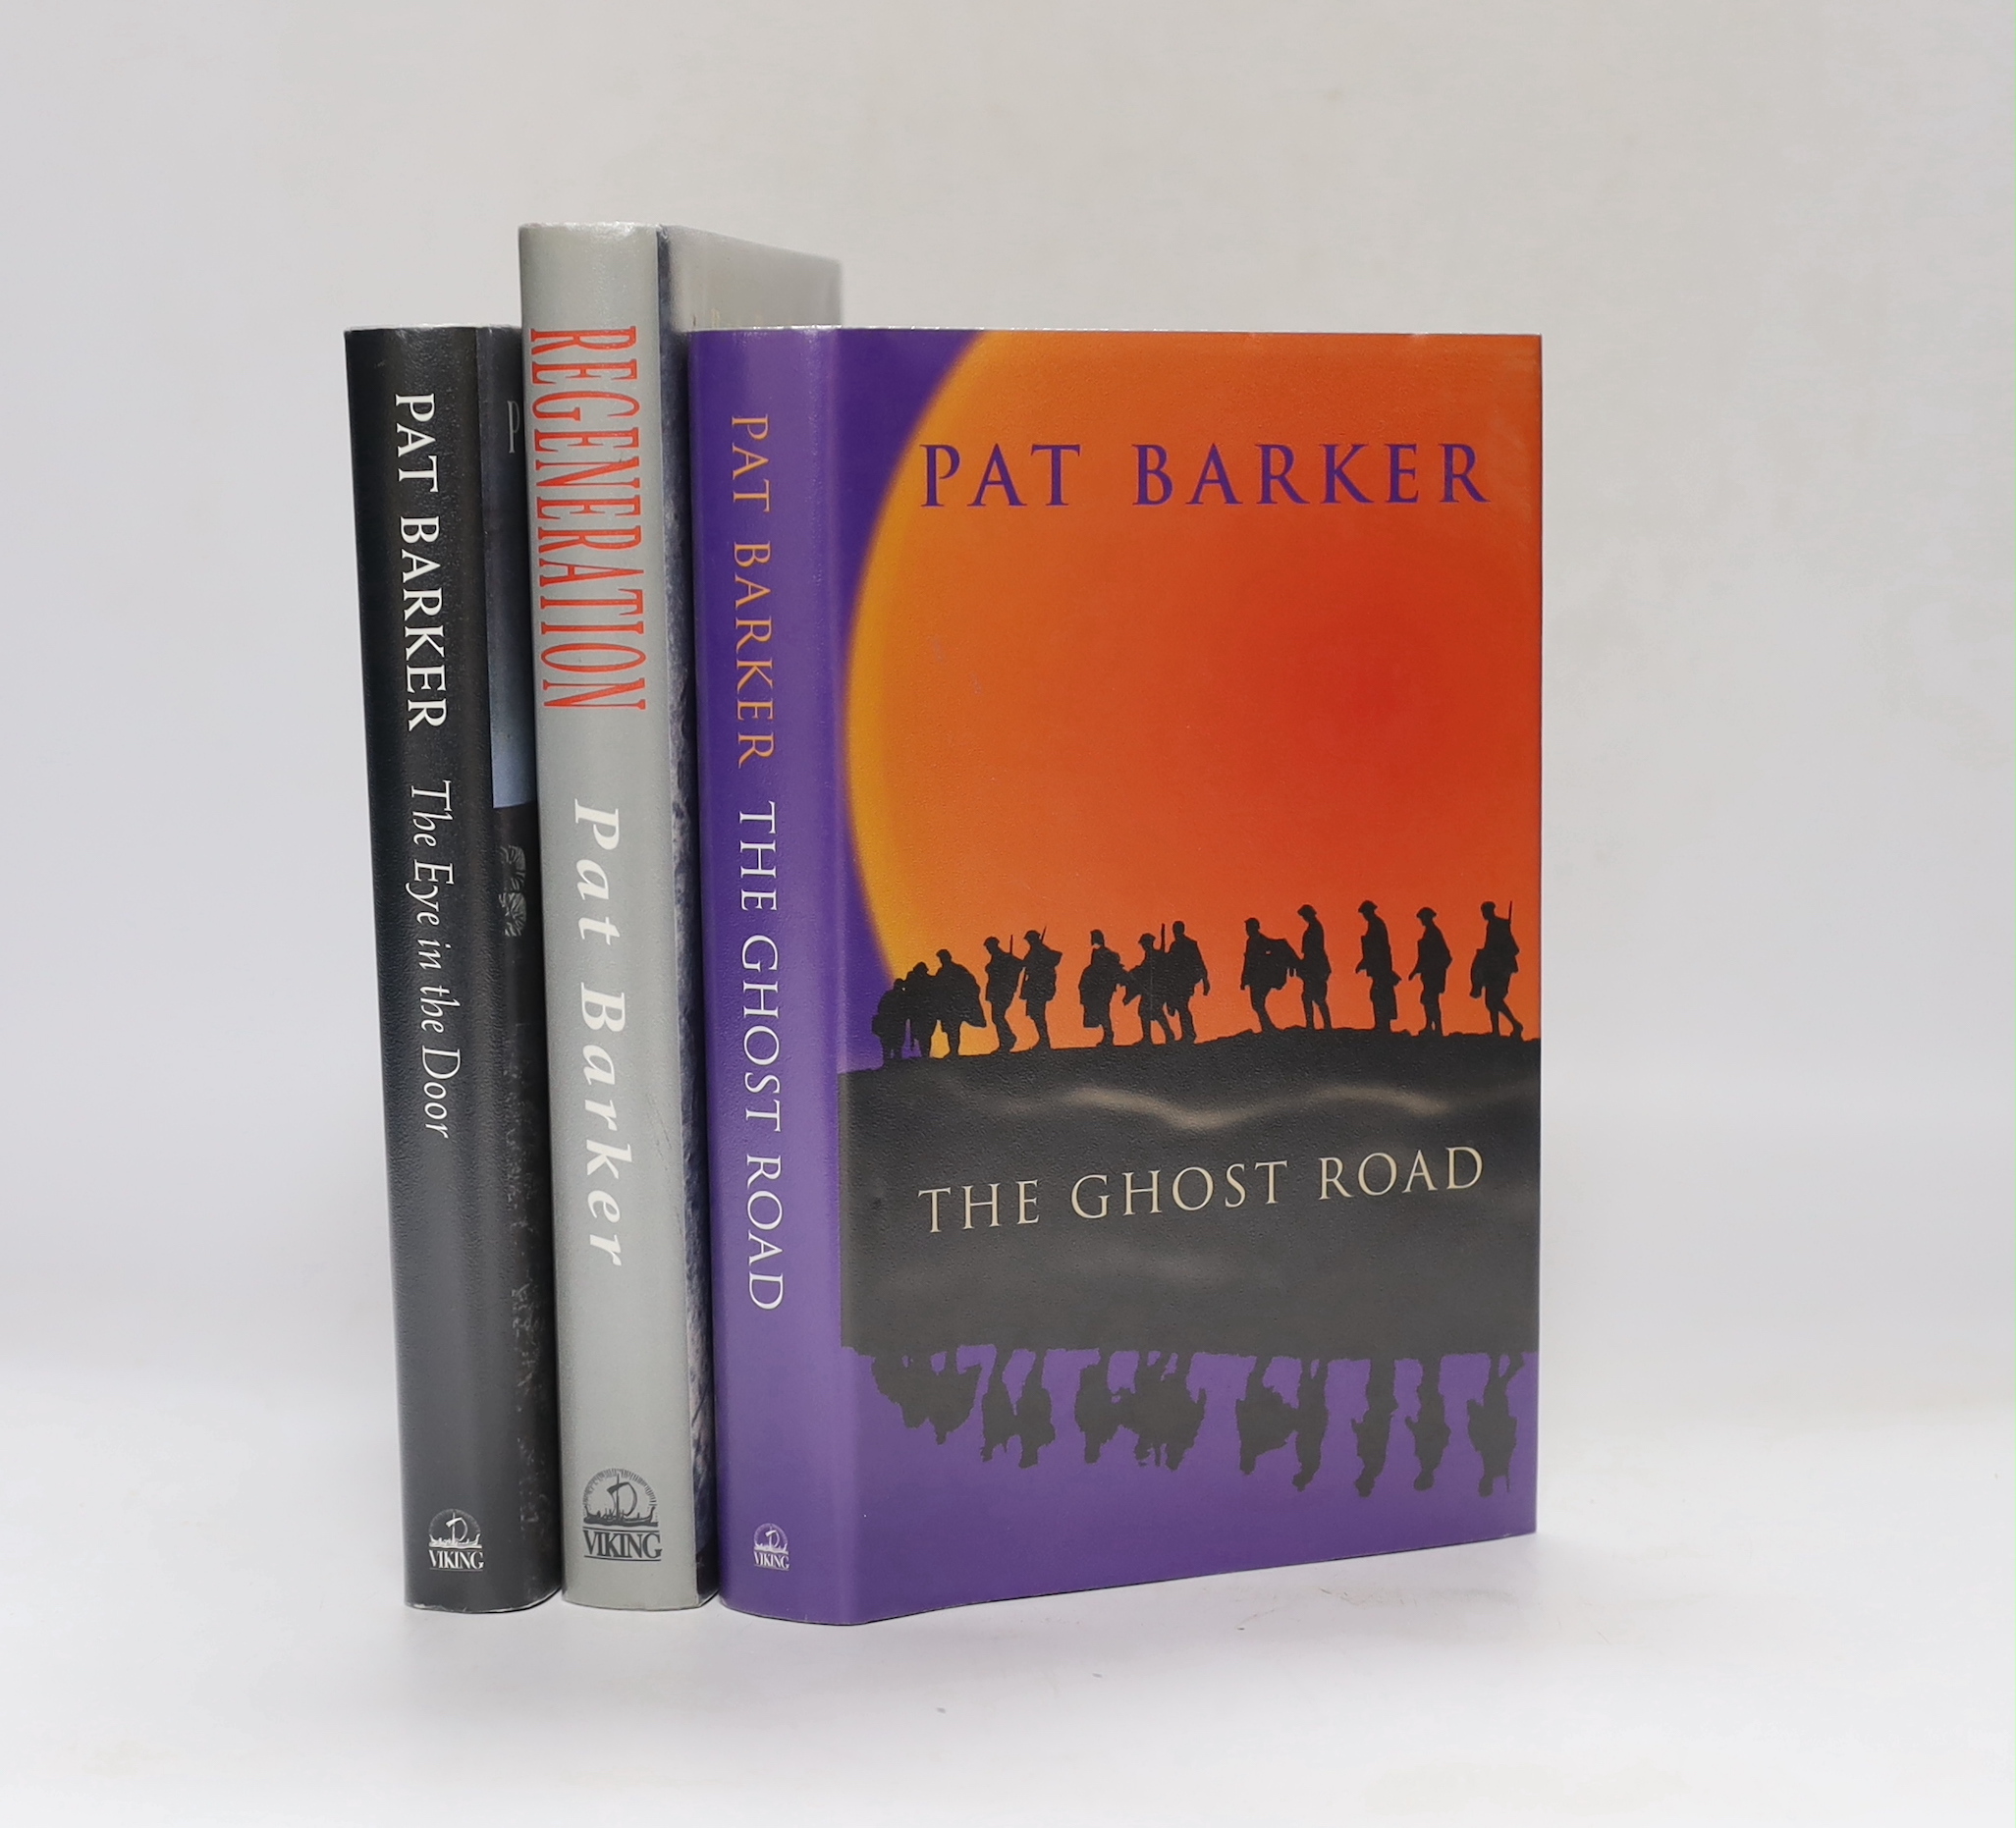 Barker, Pat - The Regeneration Trilogy, all 1st editions, all signed on titles, all with publisher’s d/j’s - Regeneration, 1991; The Eye in the Door, 1993 and The Ghost Road, [winner of the Booker Prize] 1995. A fine set